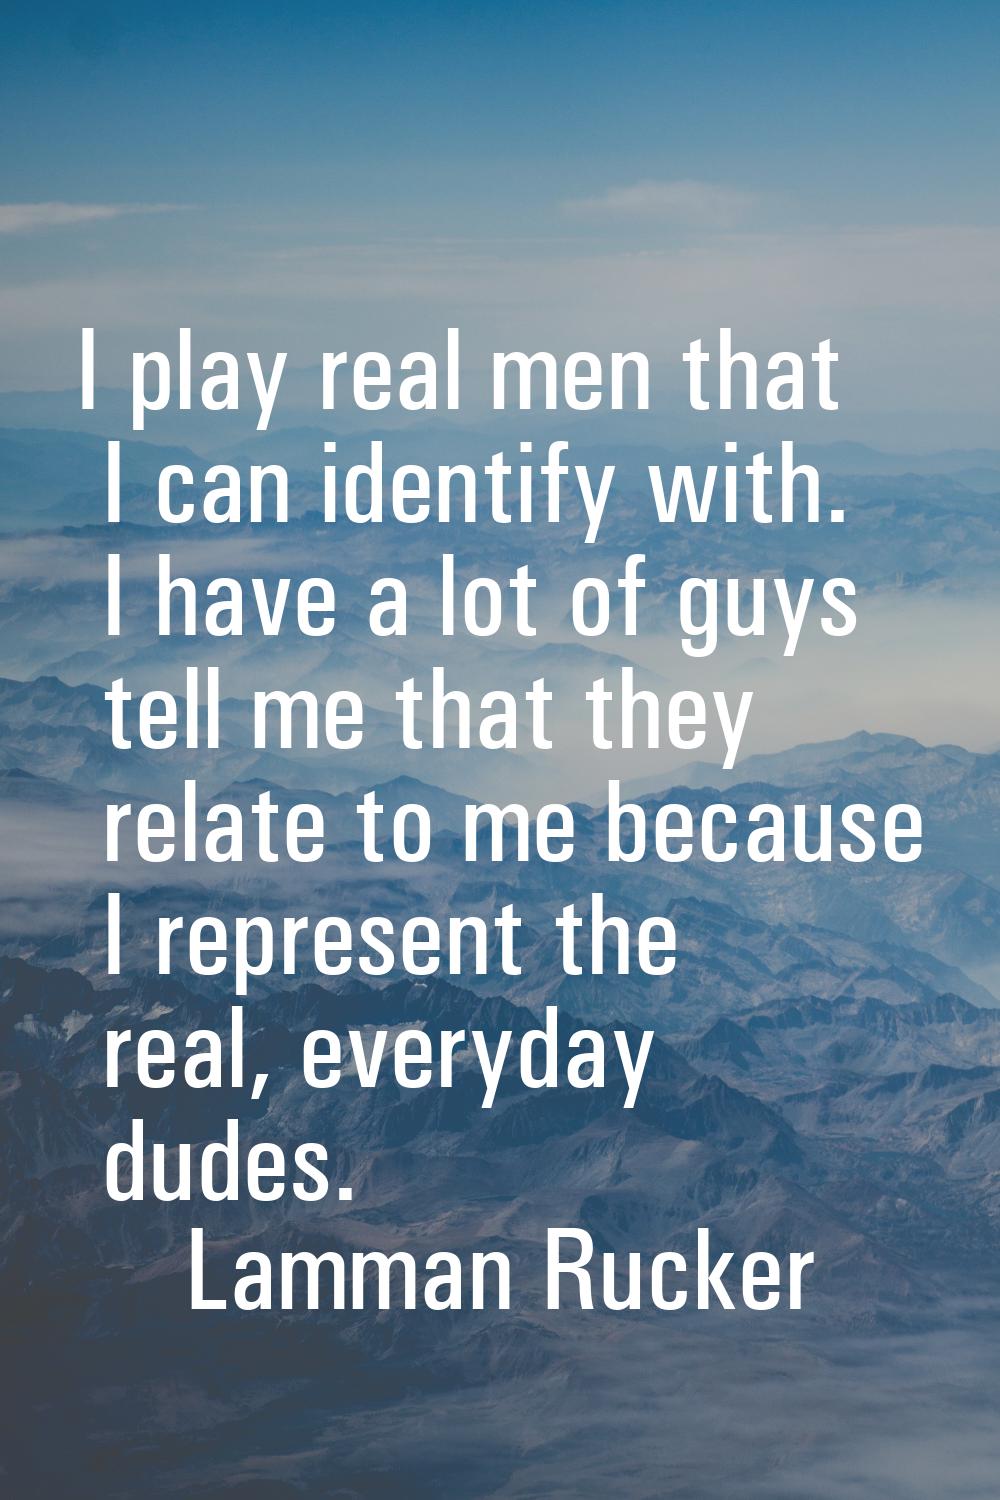 I play real men that I can identify with. I have a lot of guys tell me that they relate to me becau